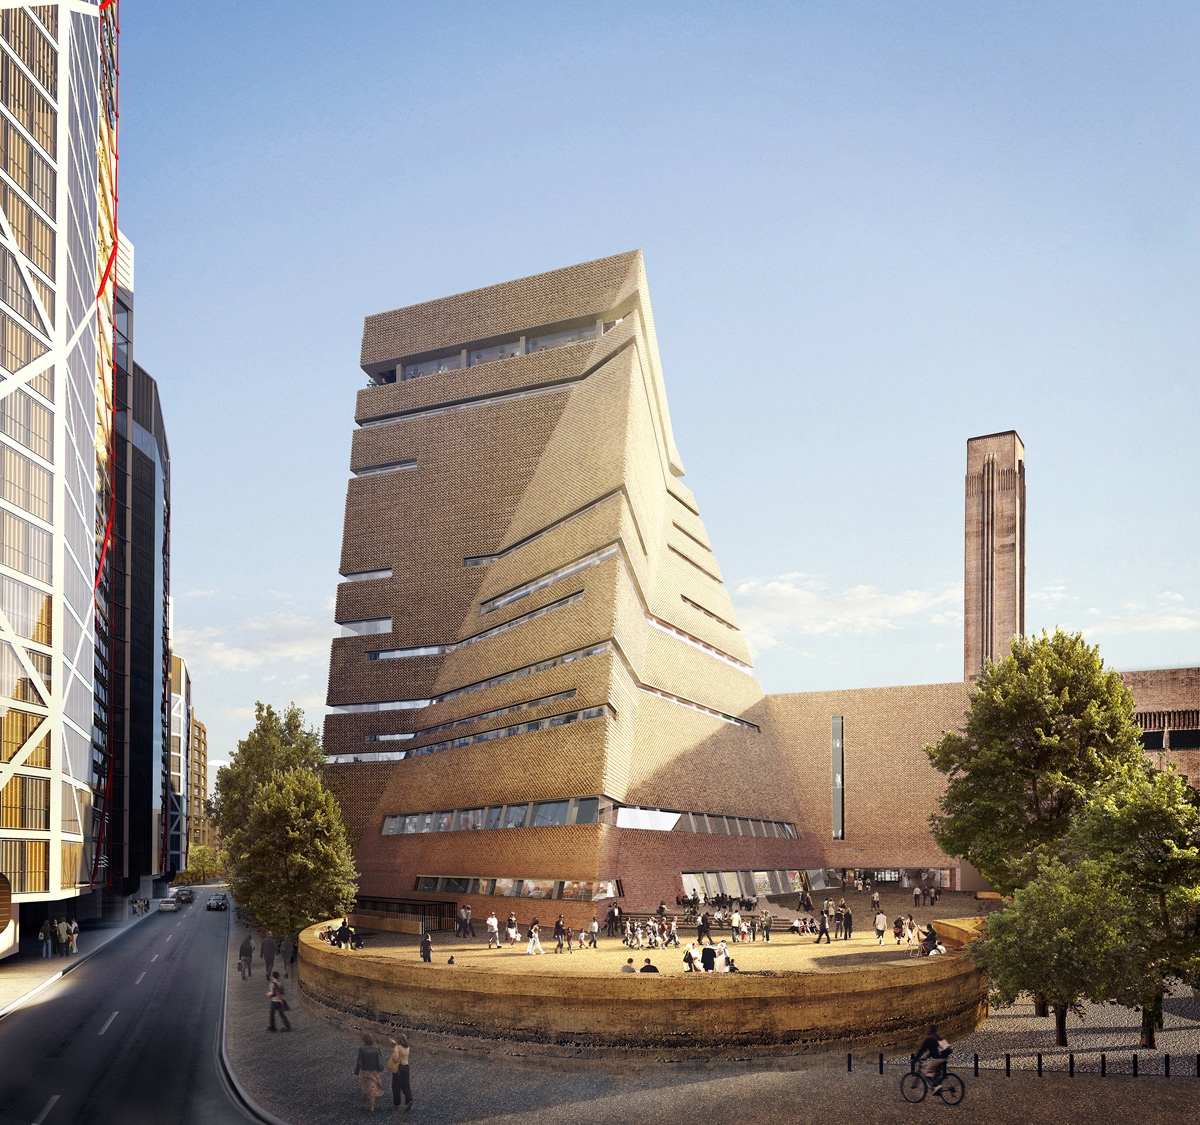 Tate Modern's extension project comes under scrutiny